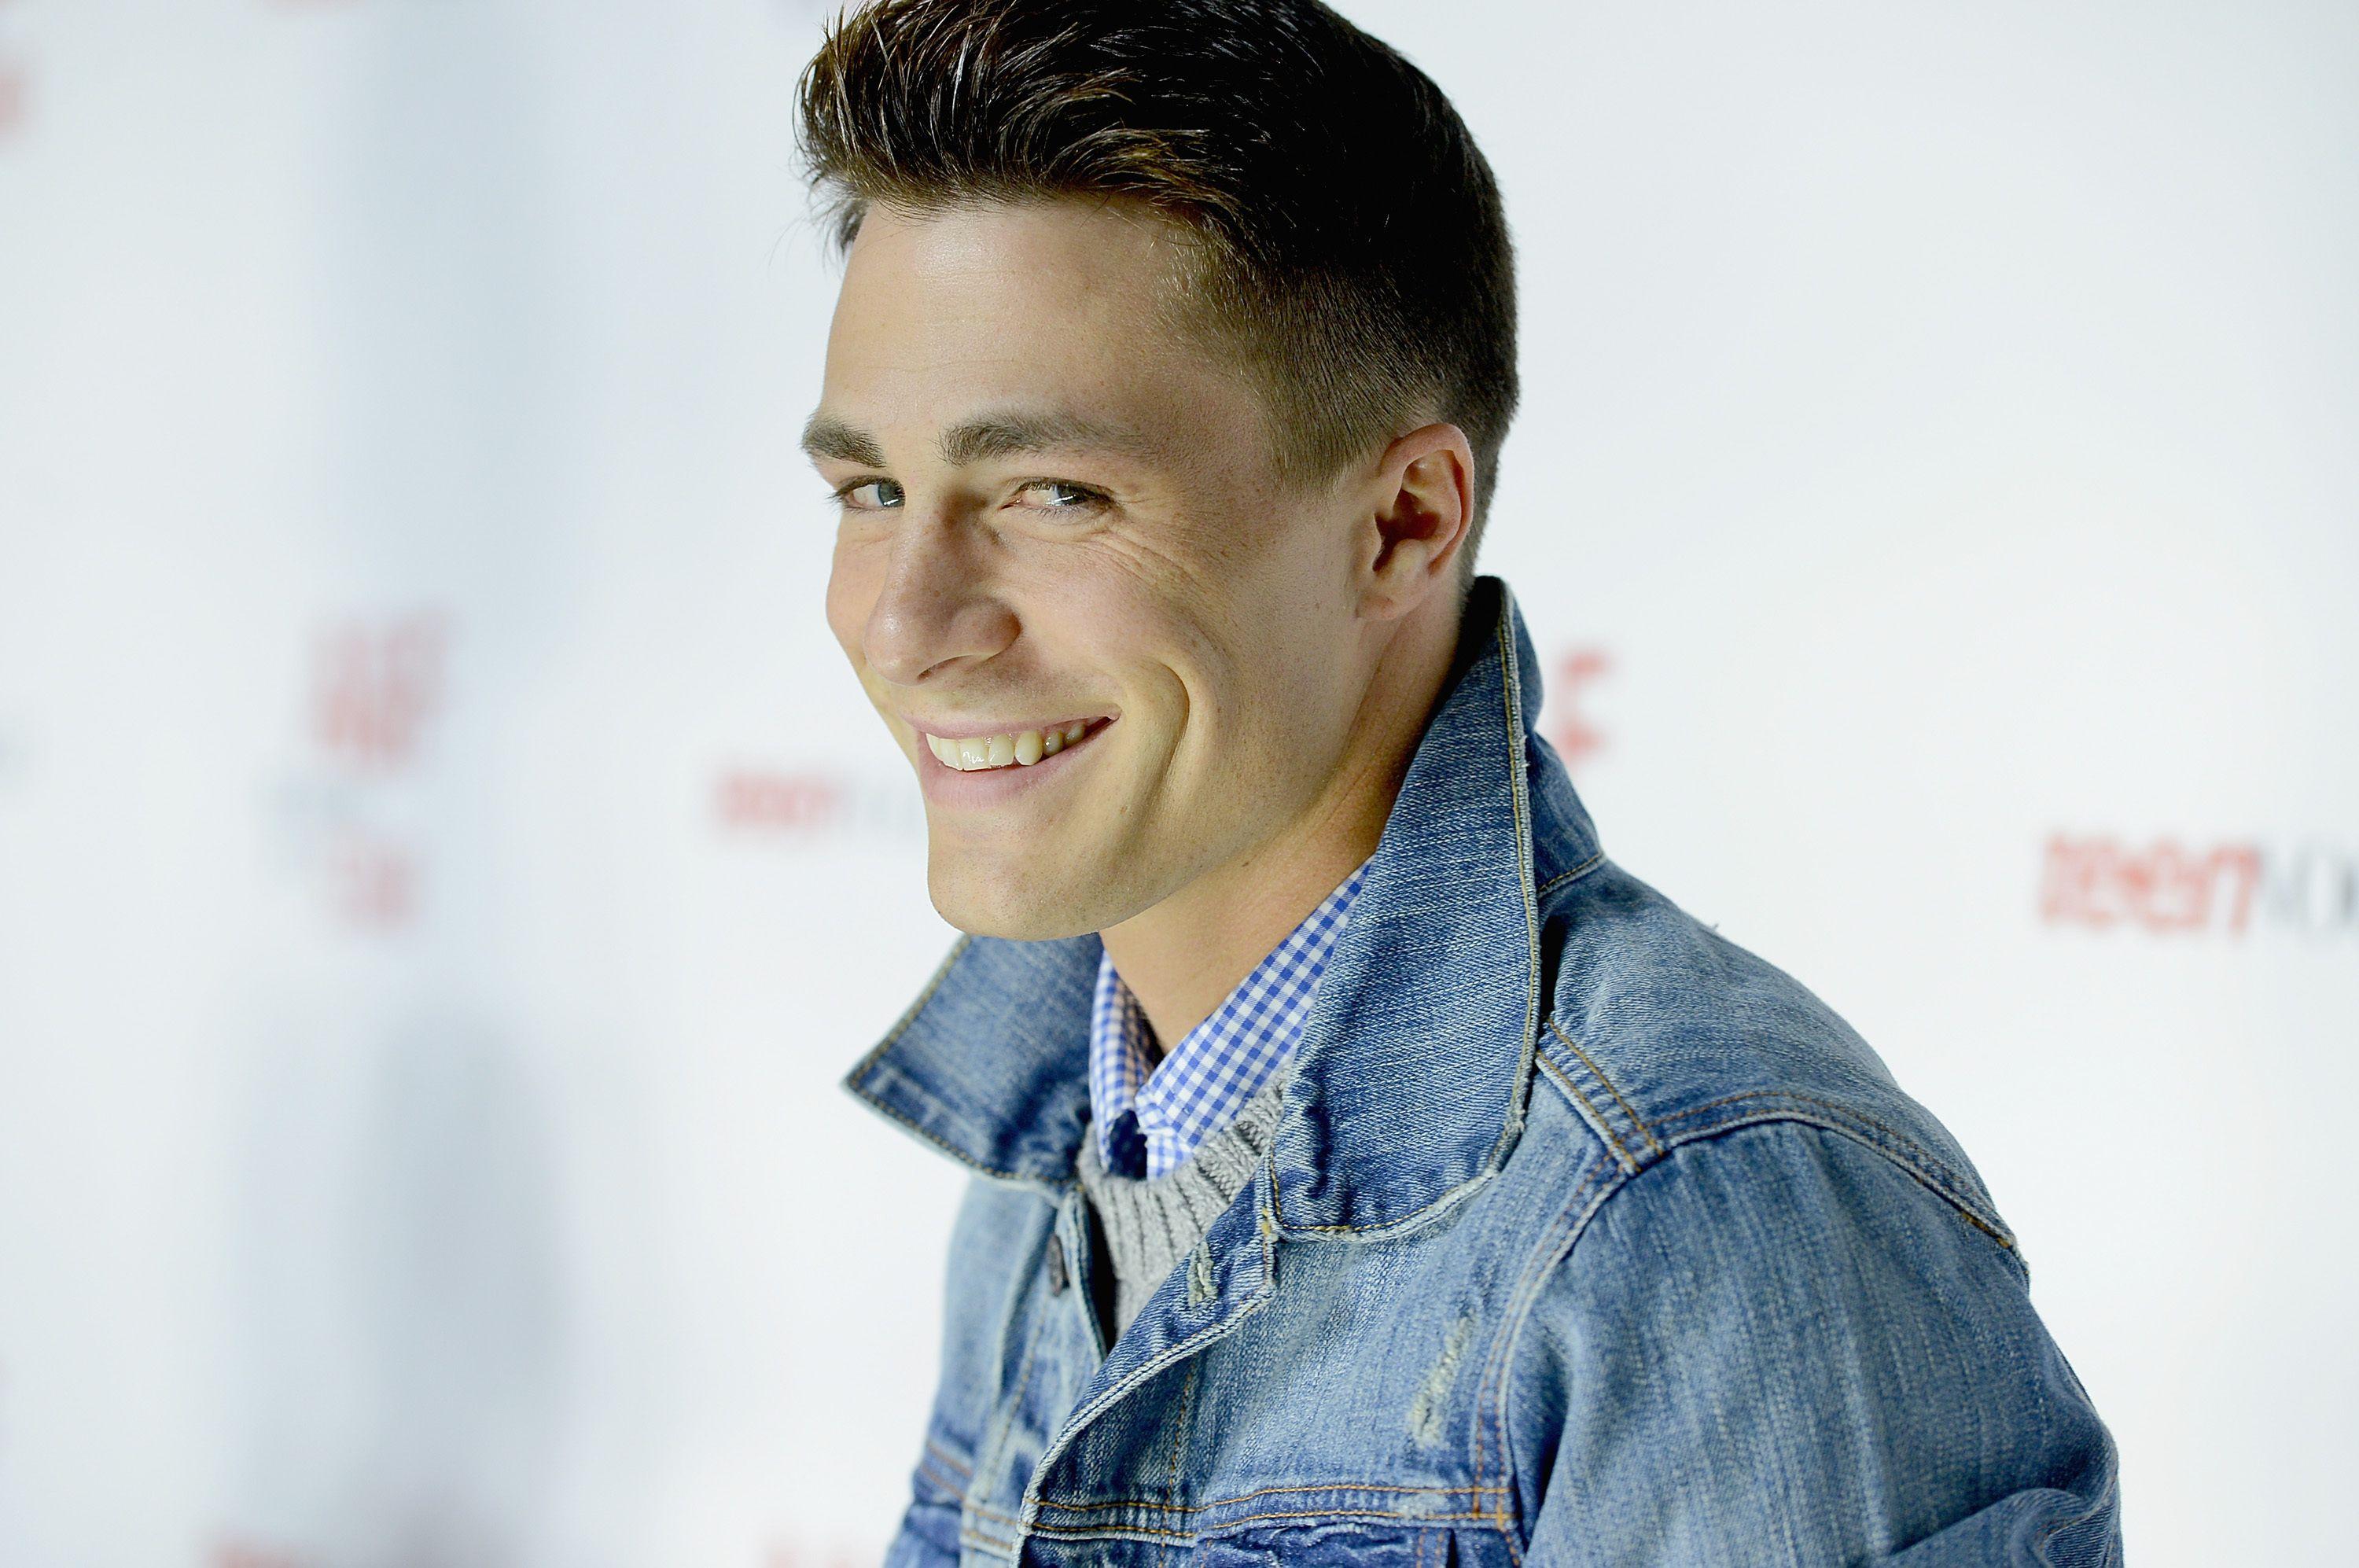 Colton Haynes Smile Wallpapers 60050 3000x1994 px HDWallSource.